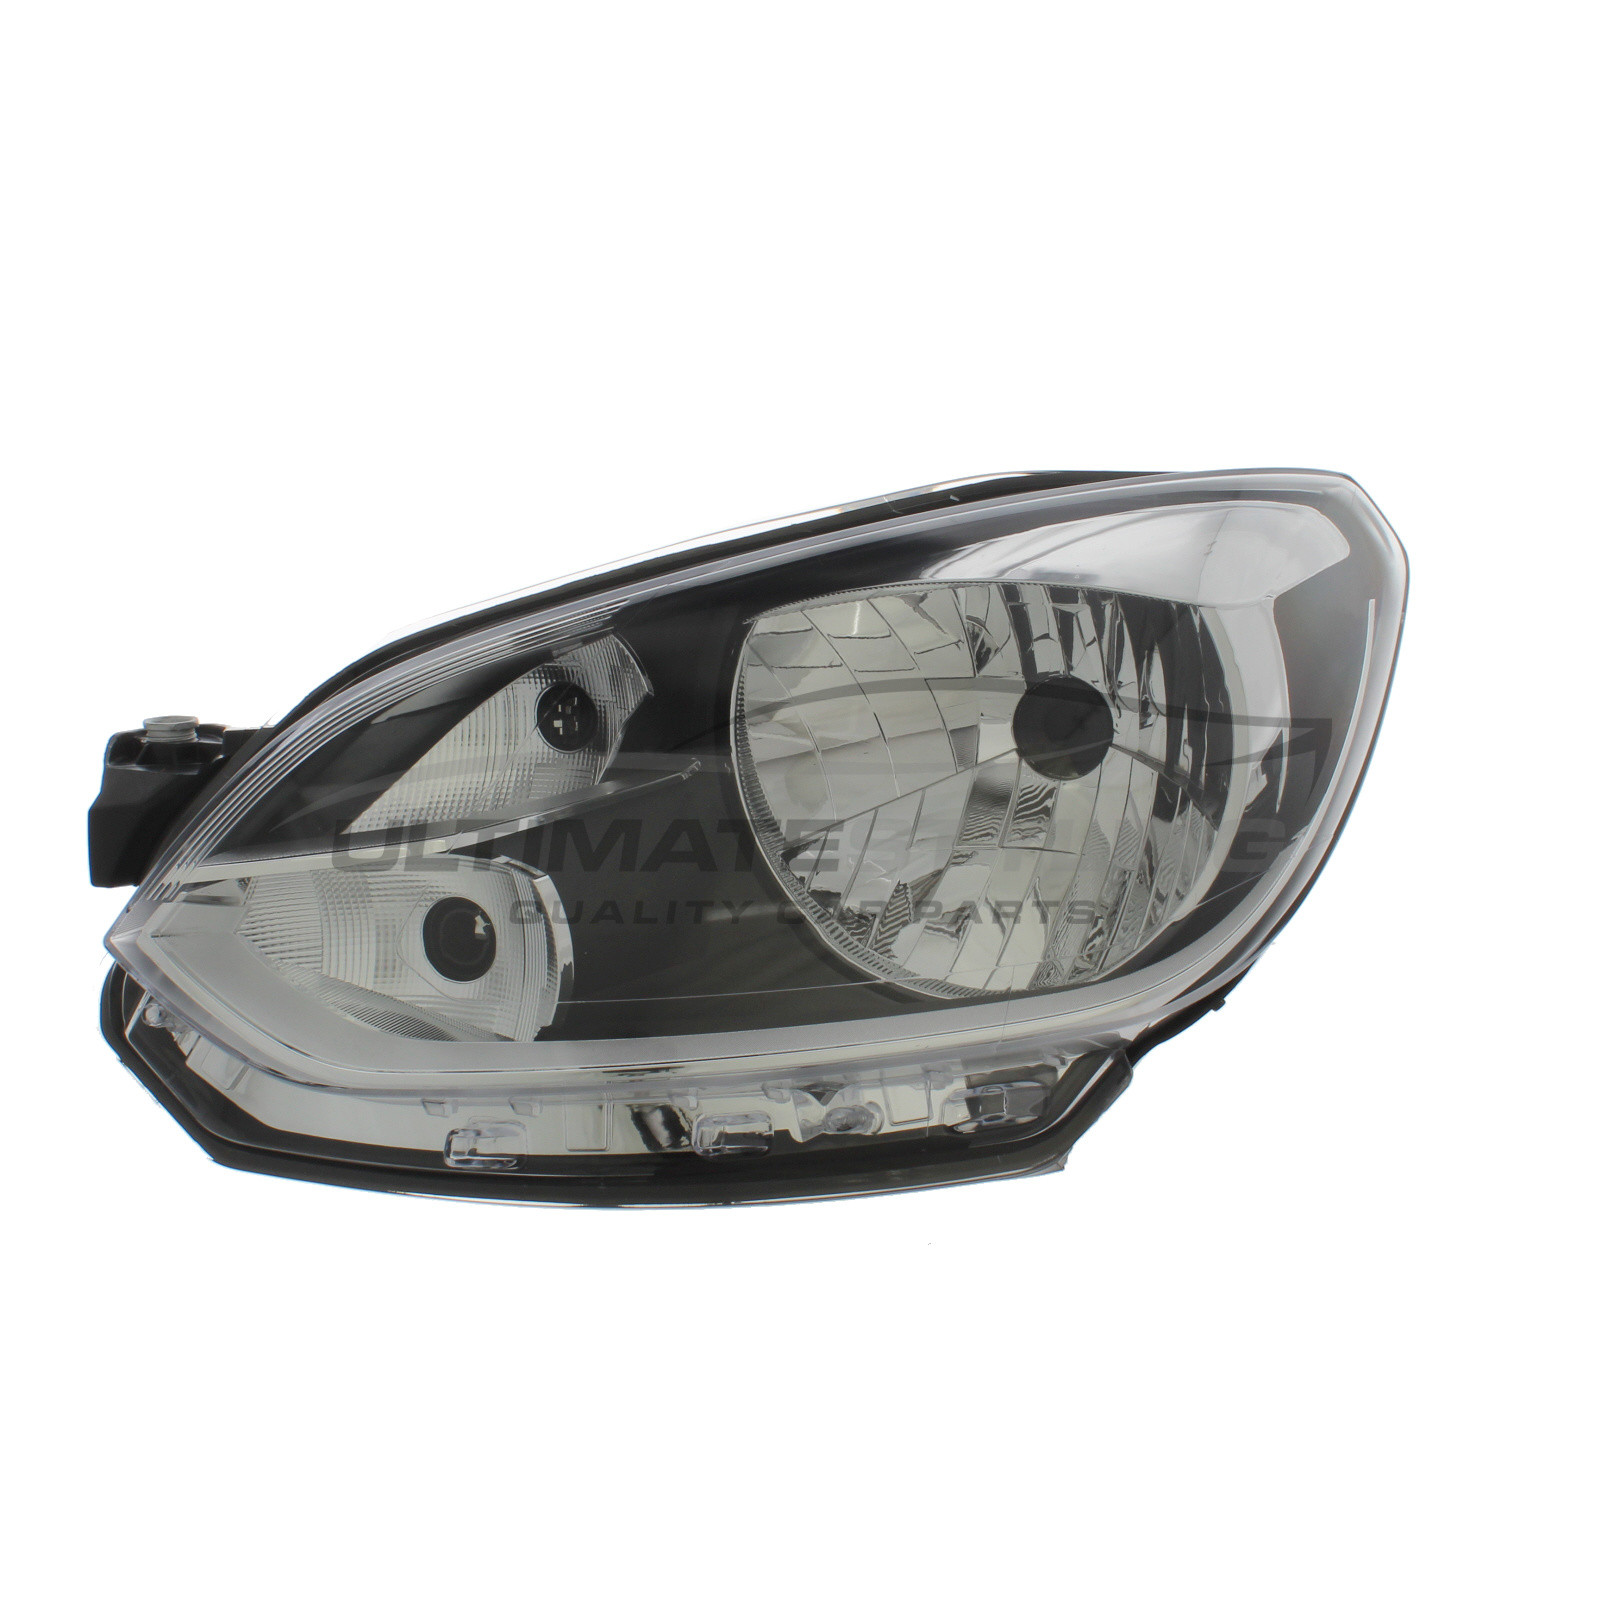 VW Up 2012-2016 Halogen, Electric Without Motor, Black Headlight / Headlamp with Chrome Surround Passengers Side (LH)